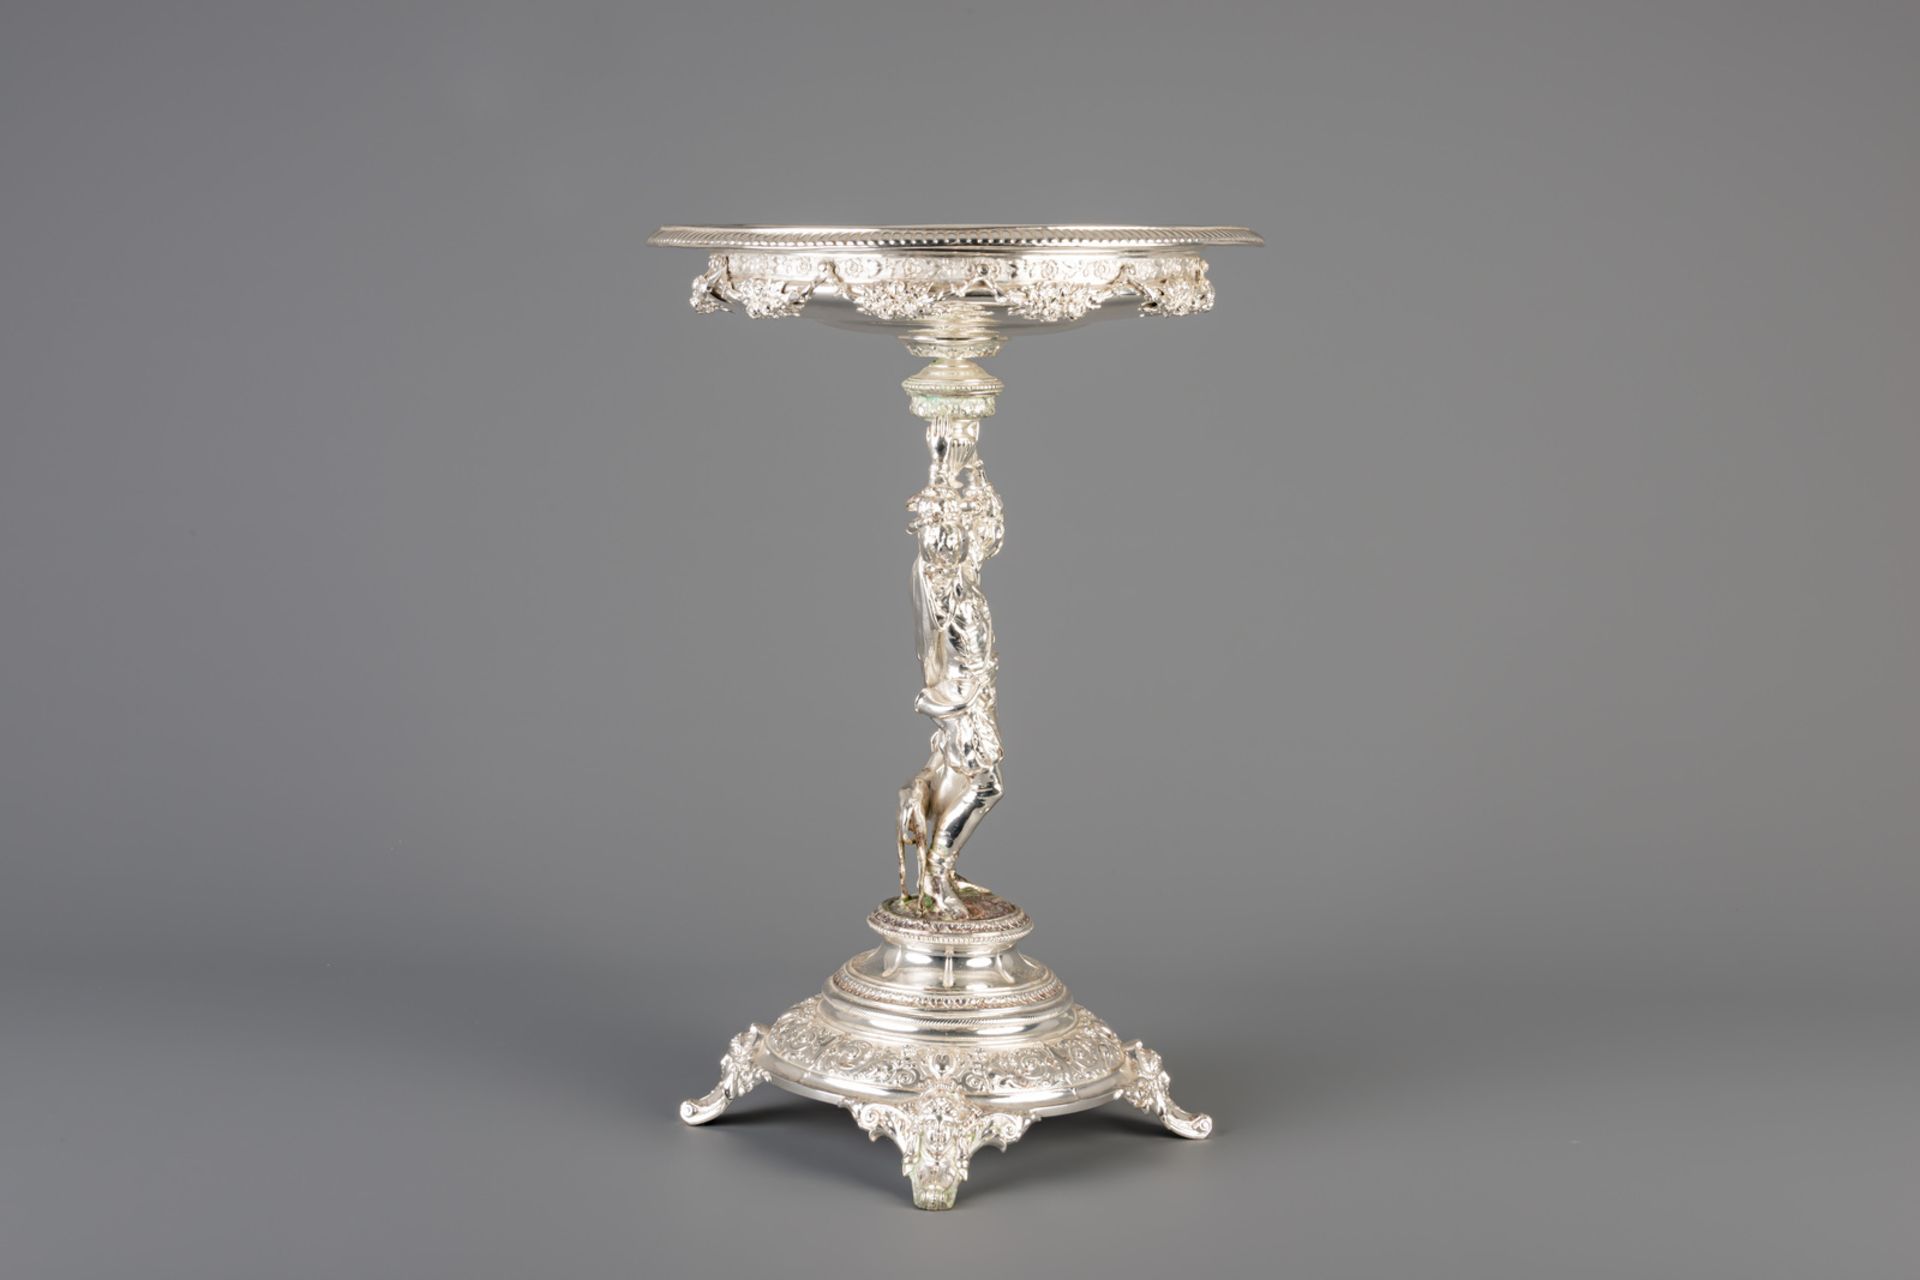 A German silver figural centerpiece with a nobleman and a greyhound during the hunt, 800/000, 19th C - Image 4 of 7